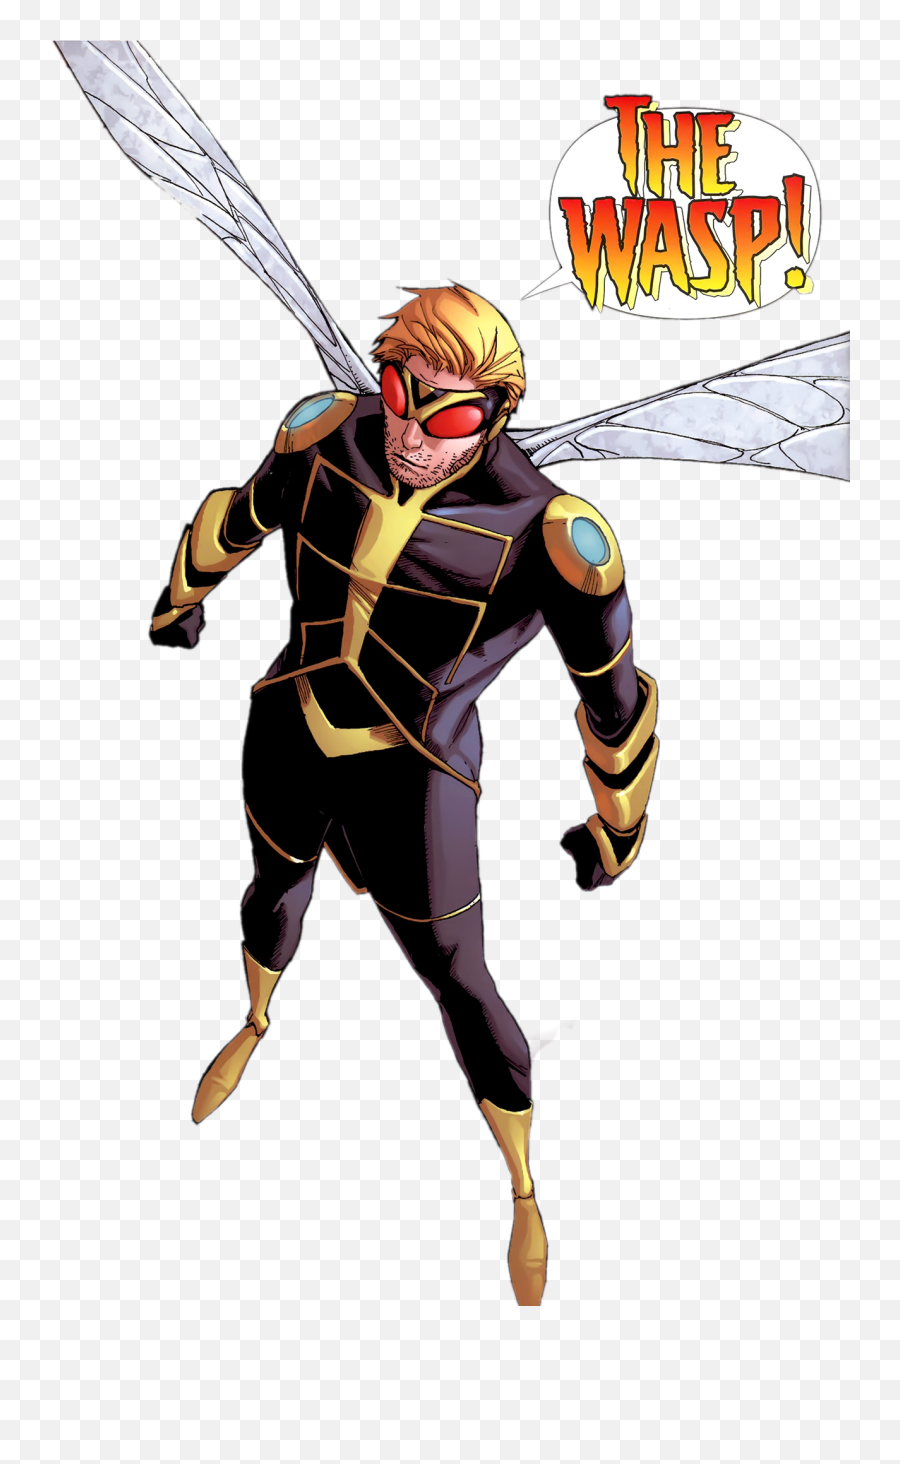 Hank Pym As The Wasp Henry Earth - 616png Henry Pym Marvel The Wasp Hank Pym,Antman Png